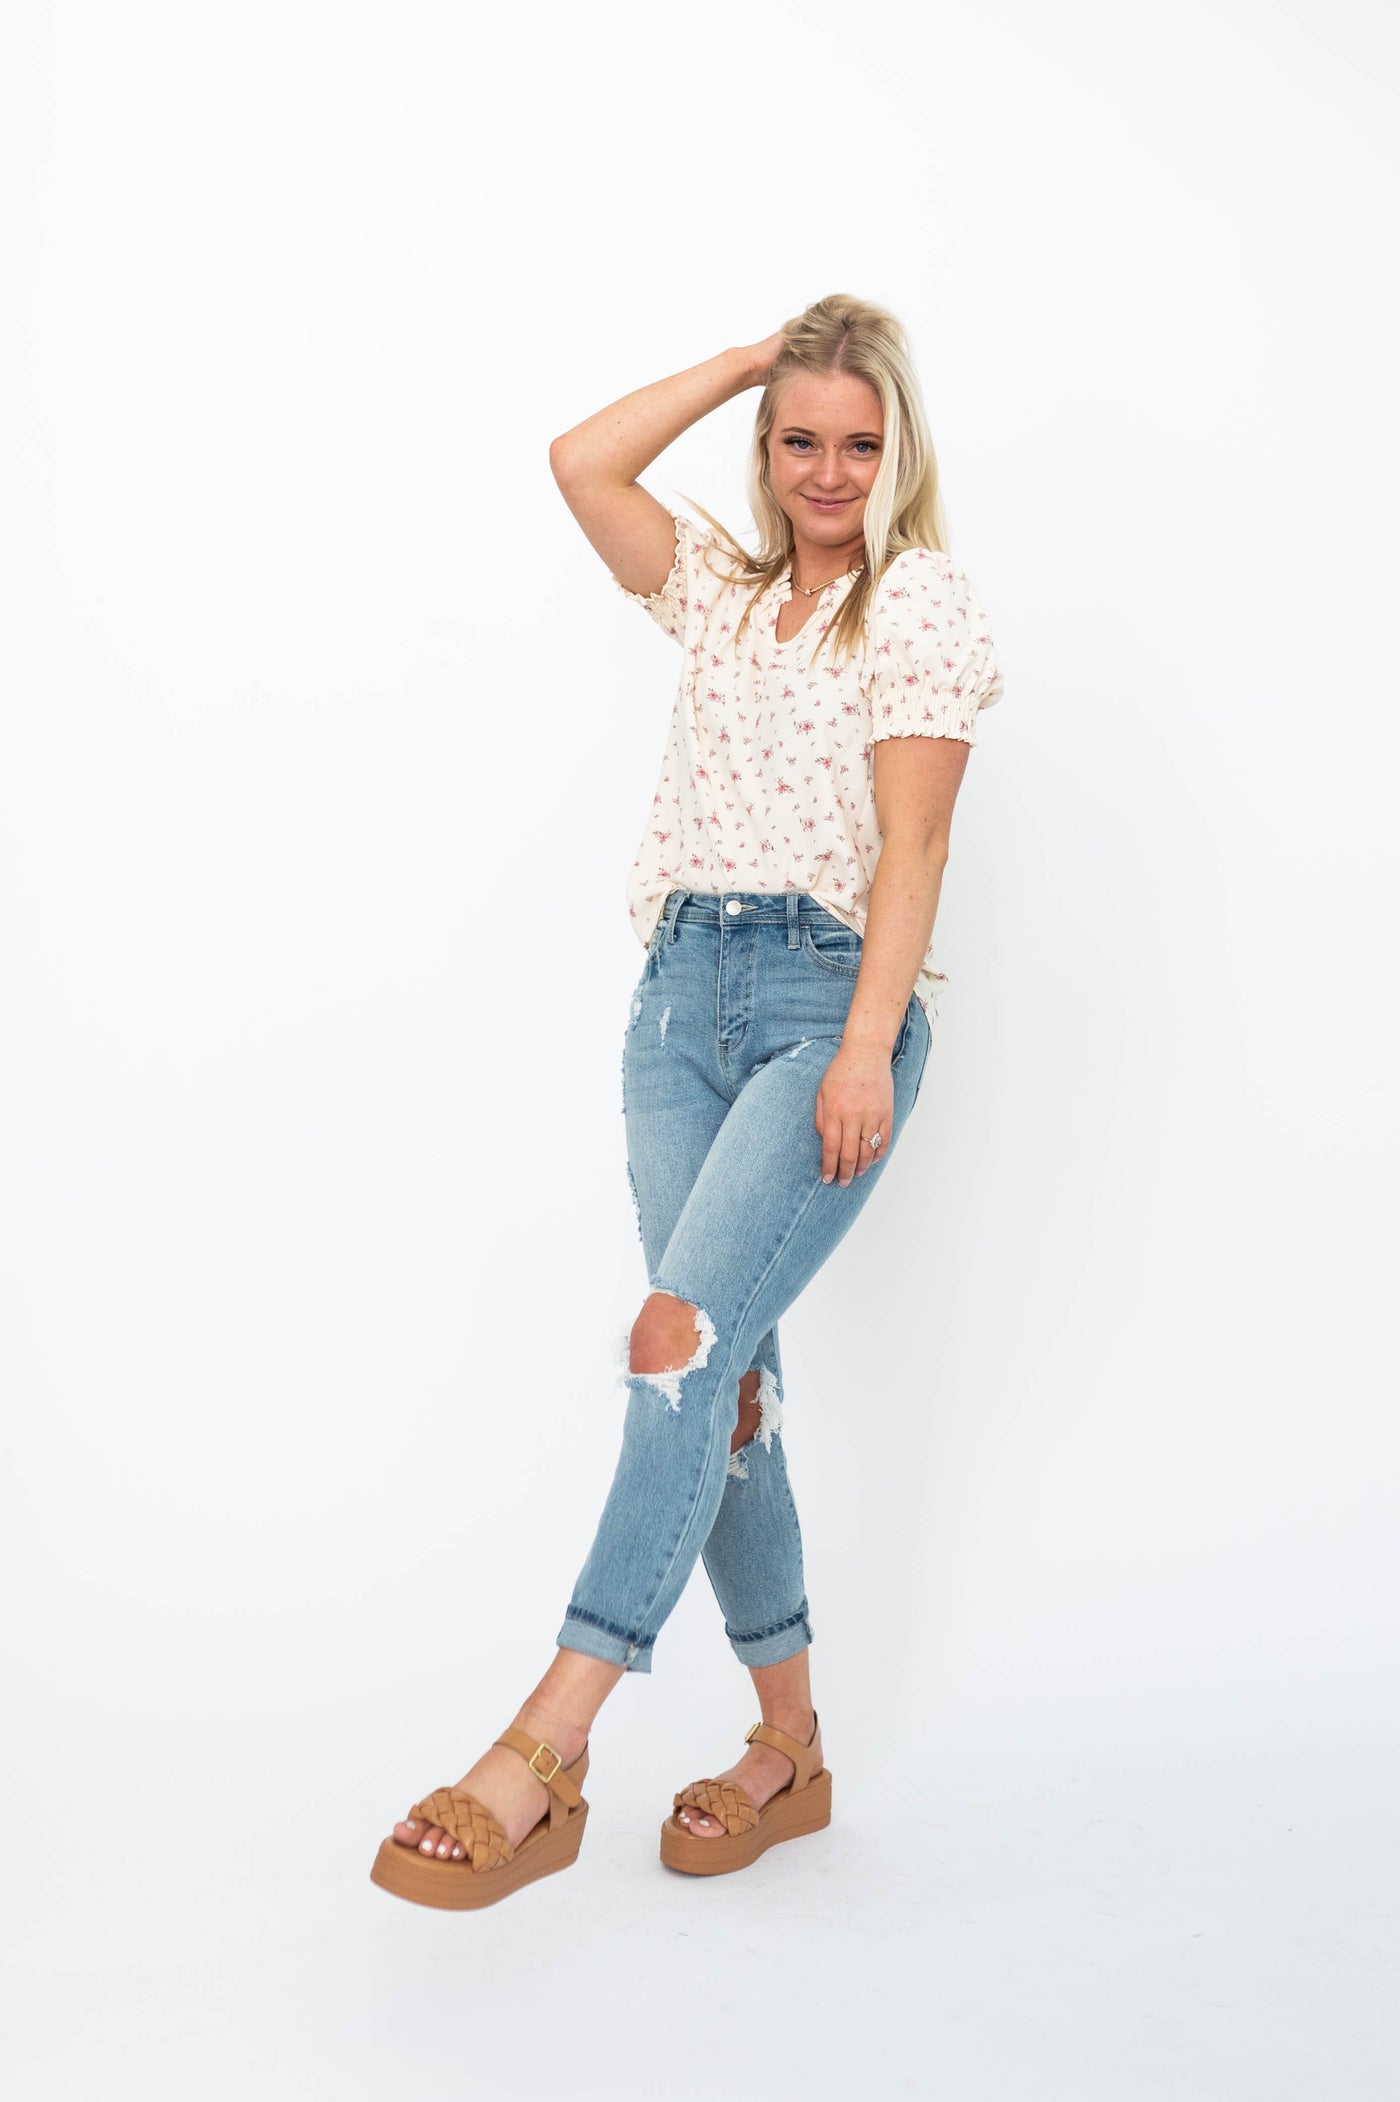 Short sleeve cream floral top with a v-neck